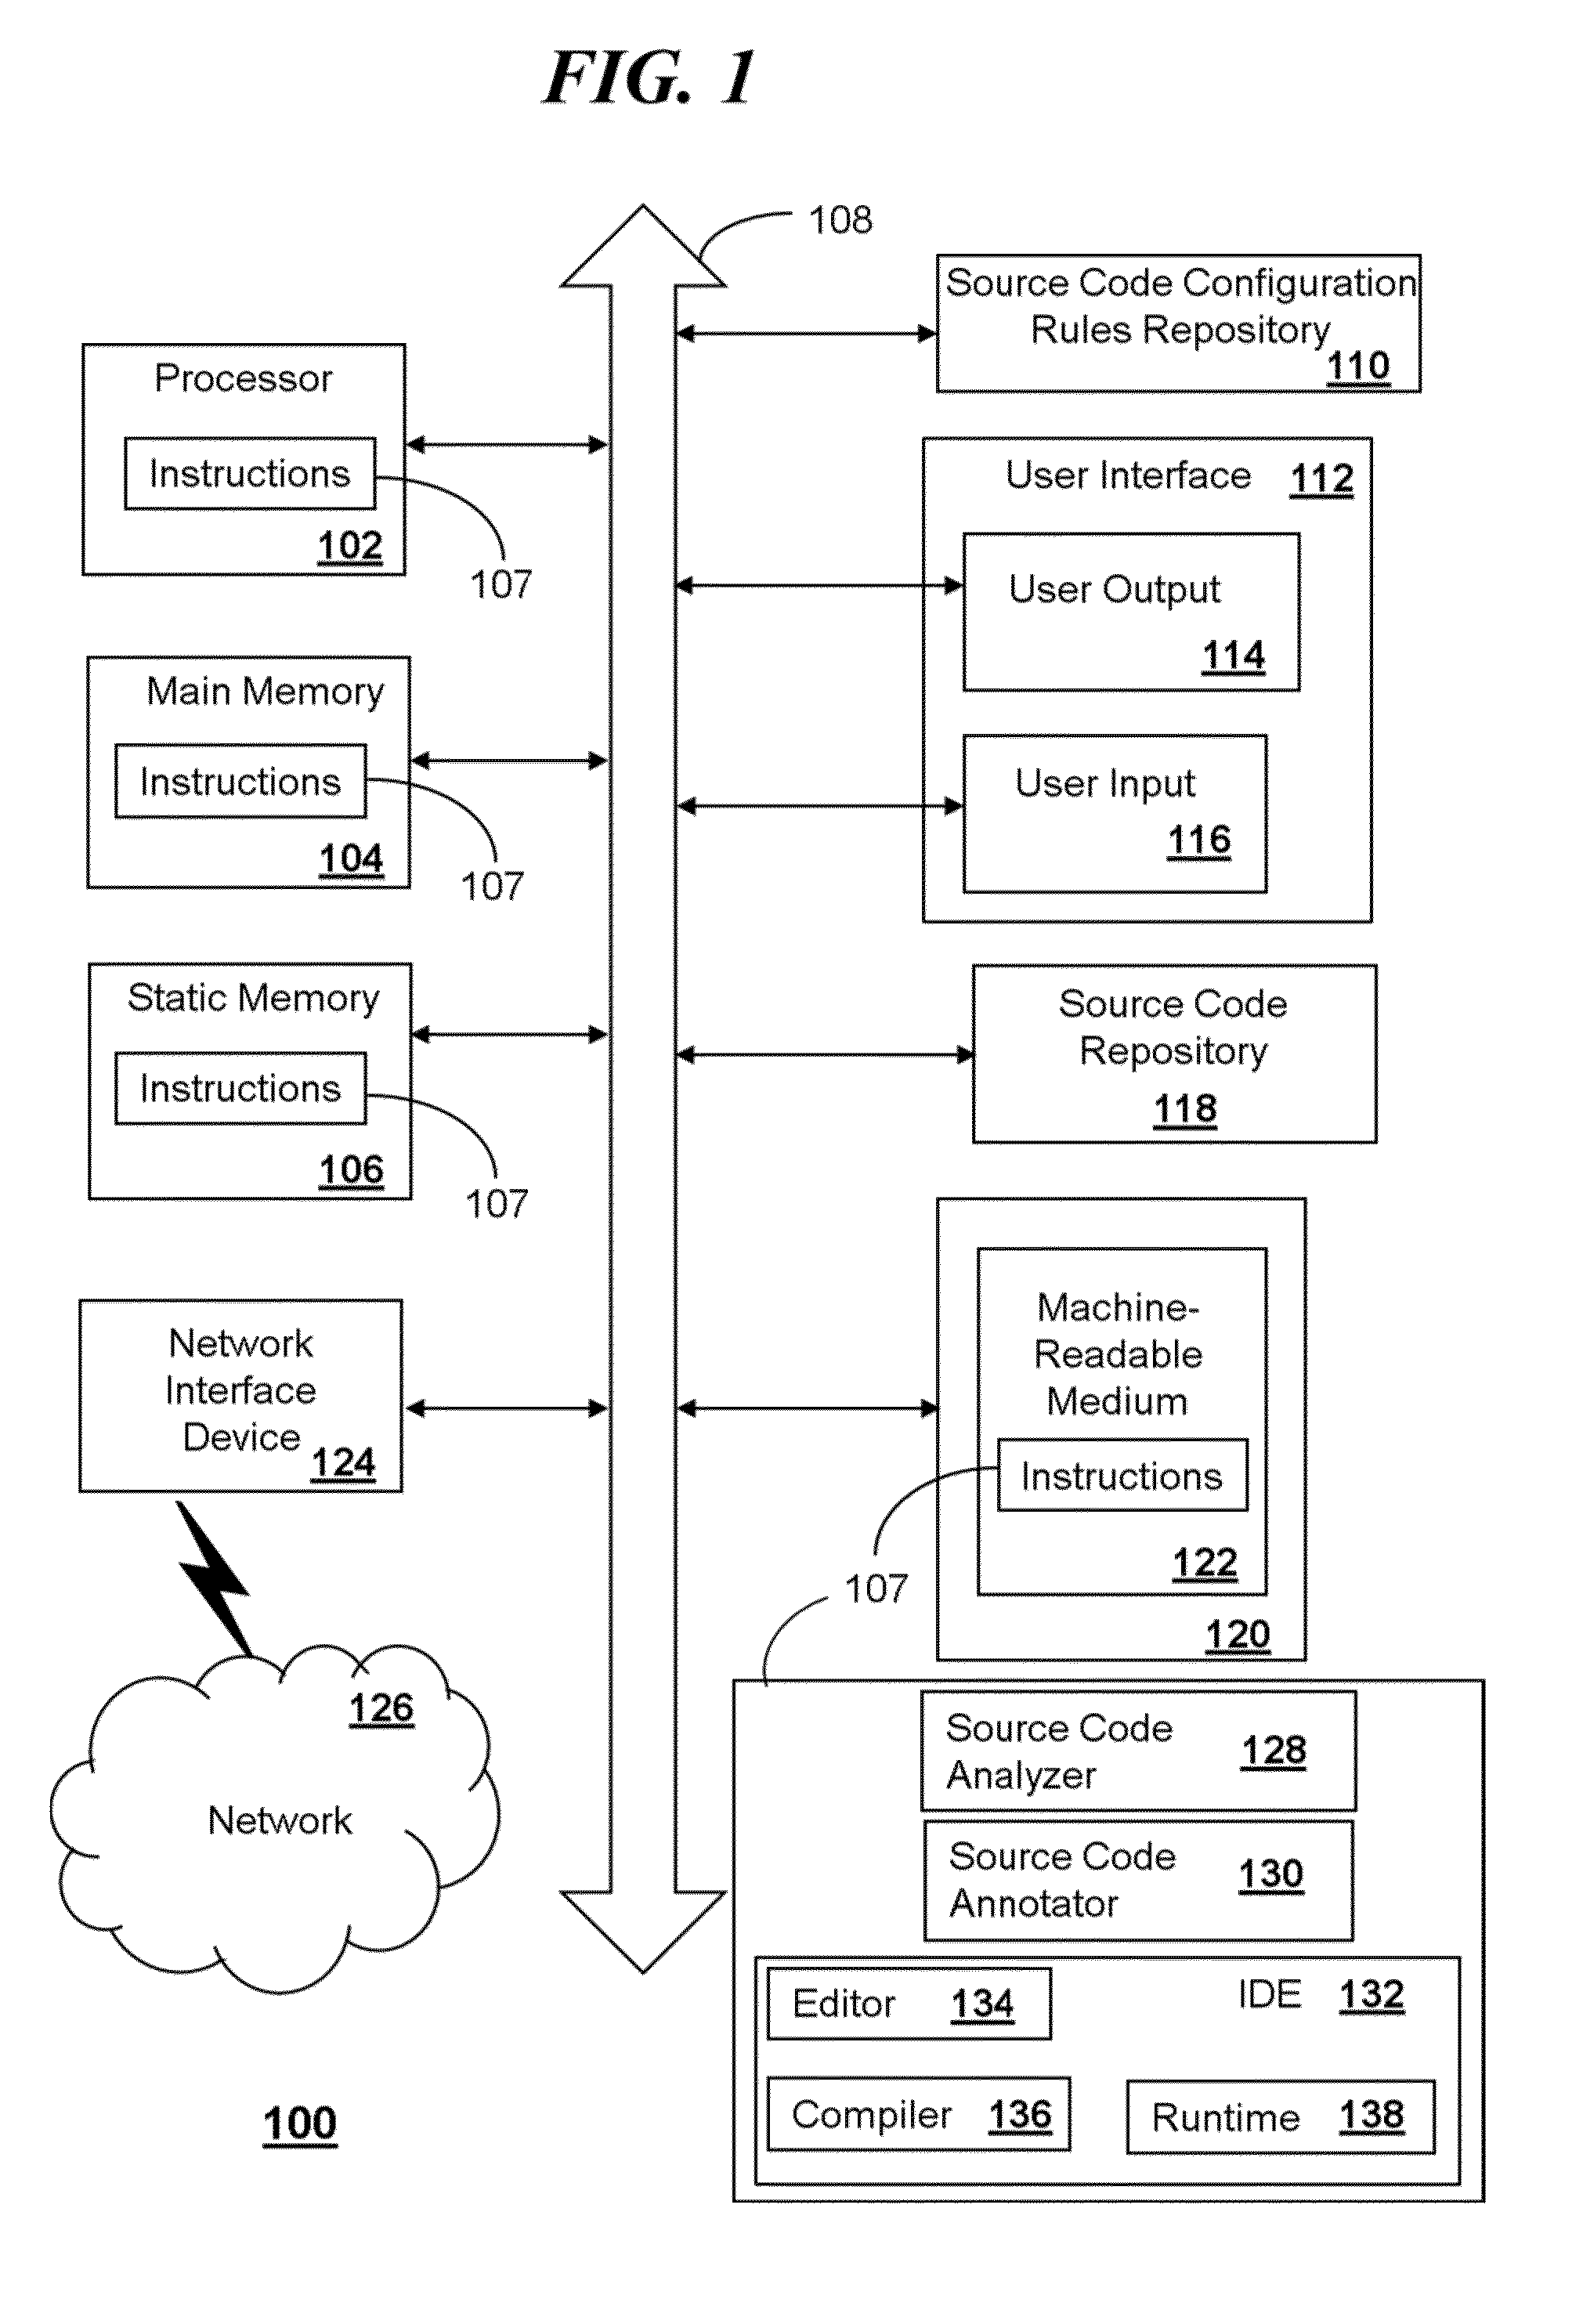 System and method for using development objectives to guide implementation of source code